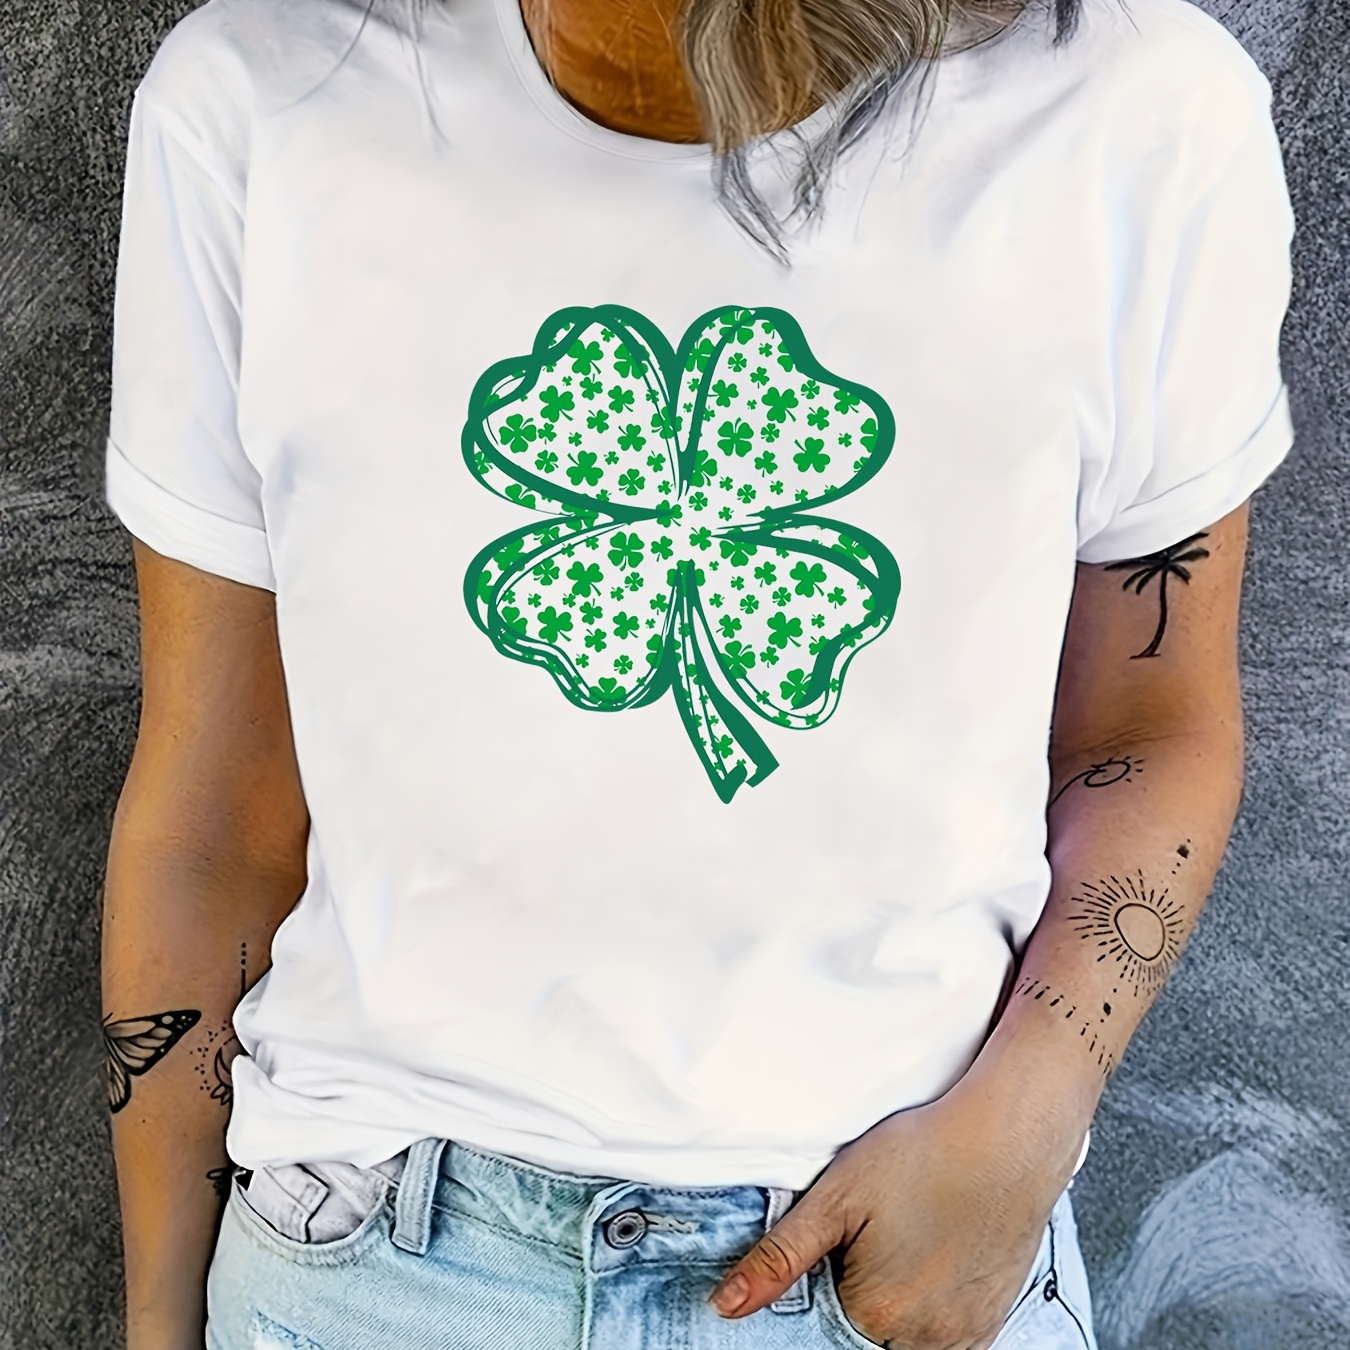 

St. Patrick's Day Graphic Print T-shirt, Short Sleeve Crew Neck Casual Top For Summer & Spring, Women's Clothing